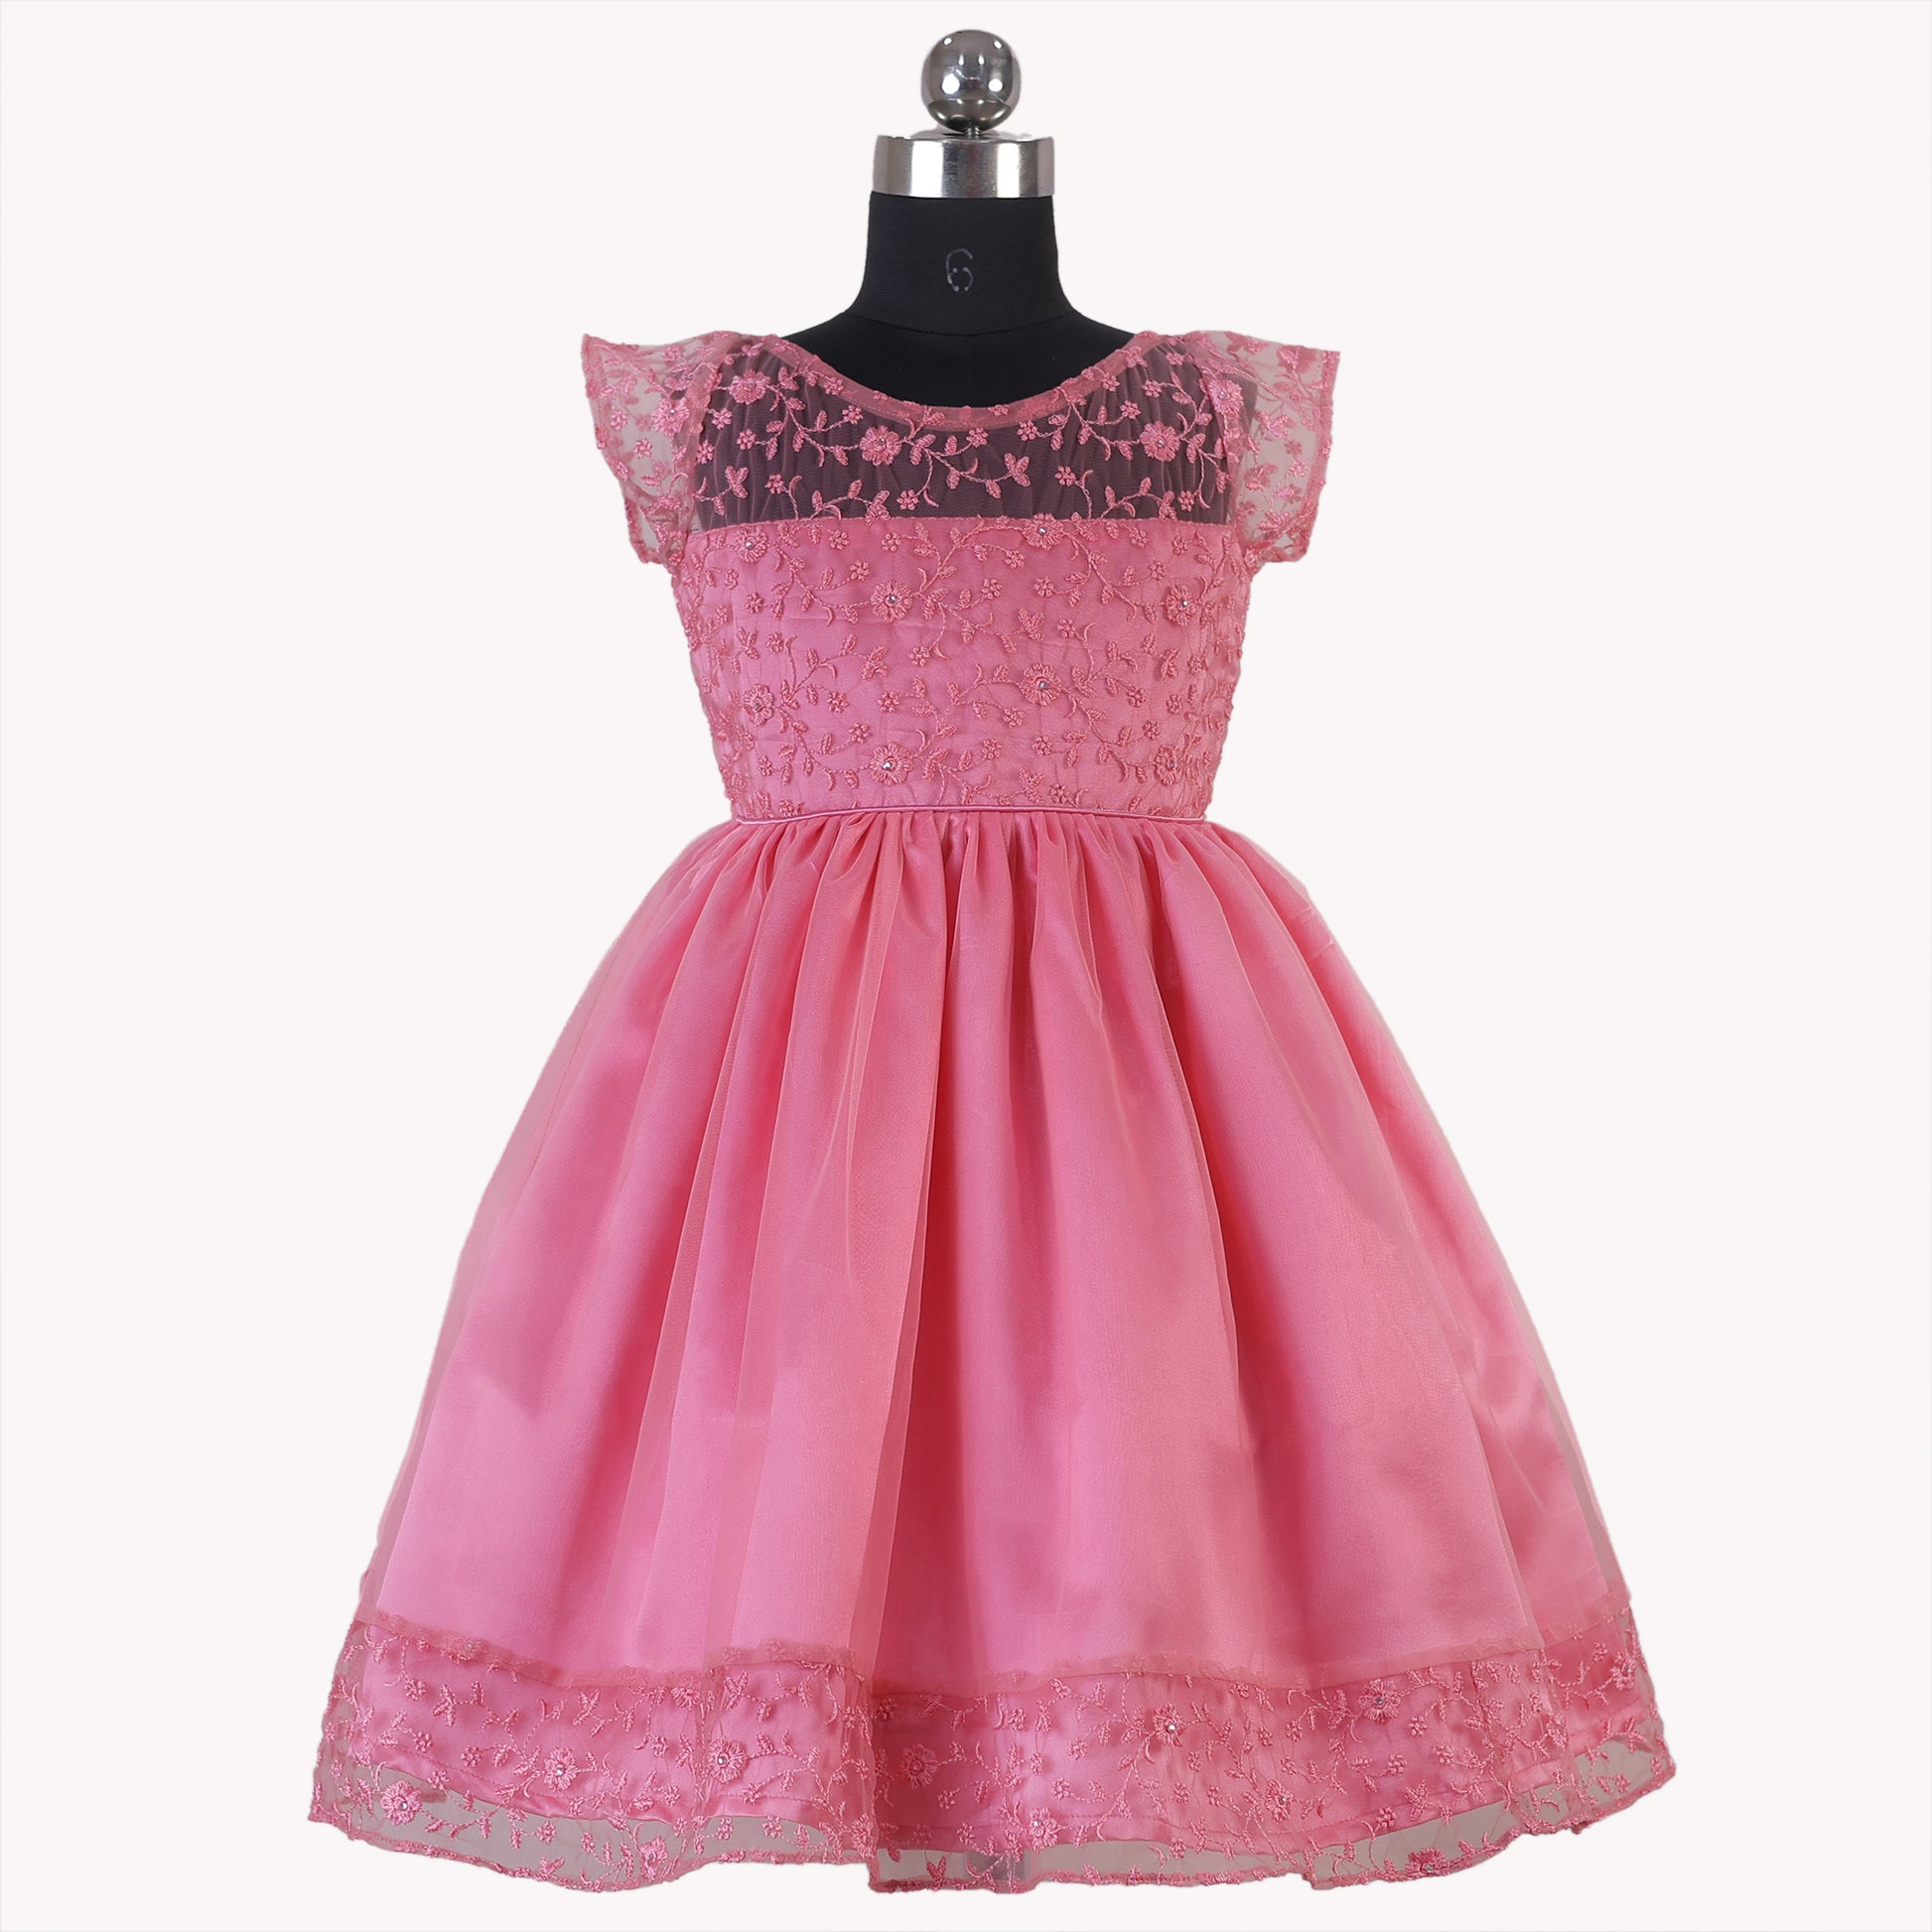 Birthday Frocks Online Unique Party Dresses for Girls Stylish designer collection HEYKIDOO new design party wear dress latest designer kids girls clothing stylish comfortable party frock 2023 floral embroidered high low style satin pink birthday party dress online shopping India